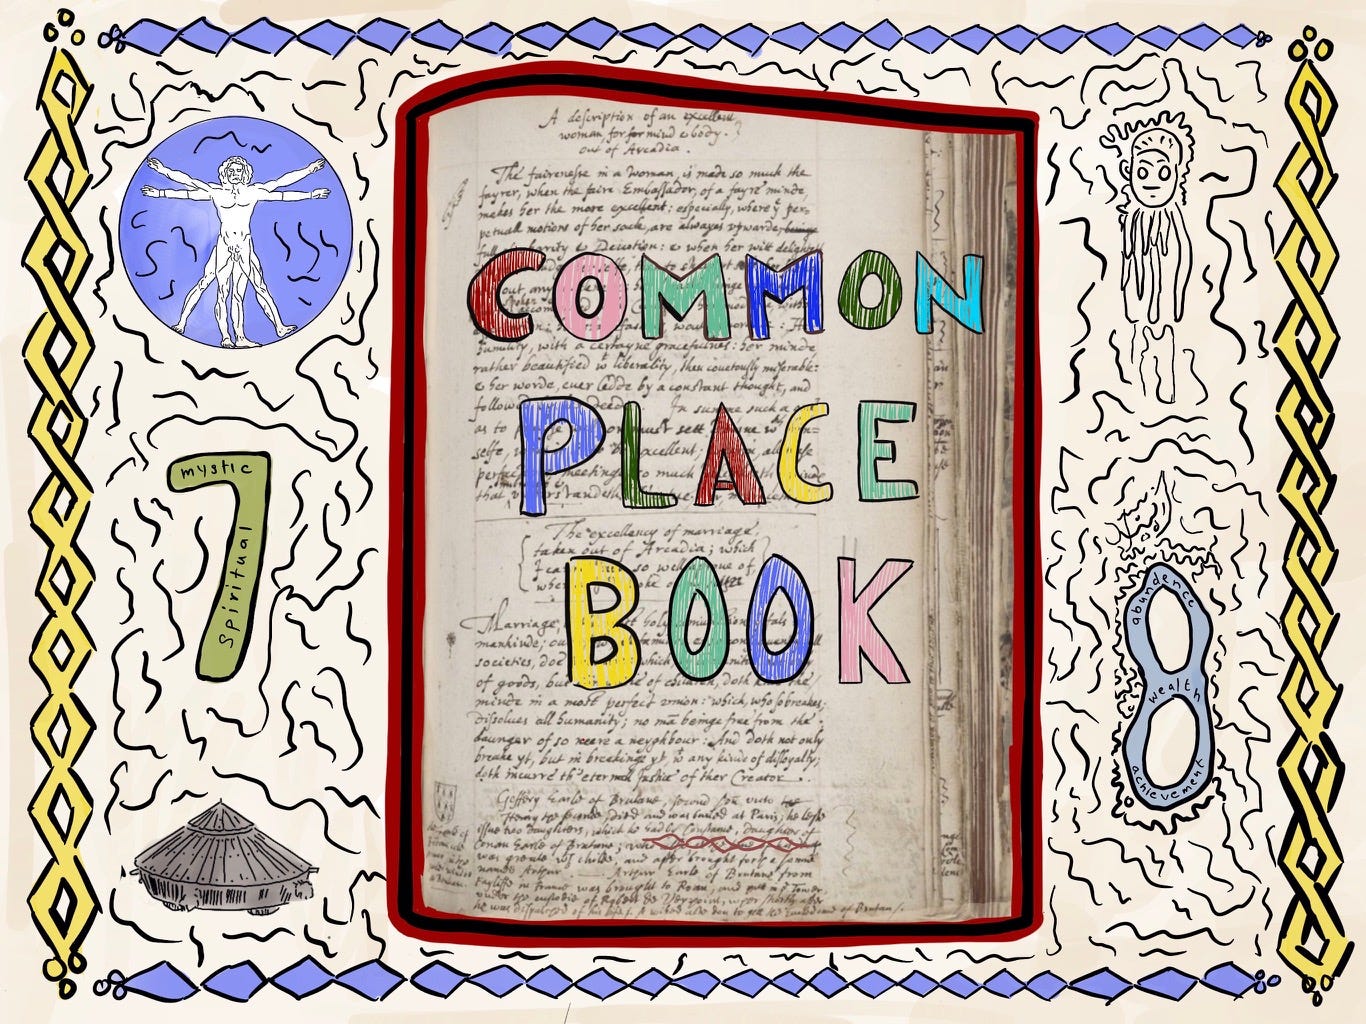 The Commonplace Book as a Thinker's Journal - Bullet Journal